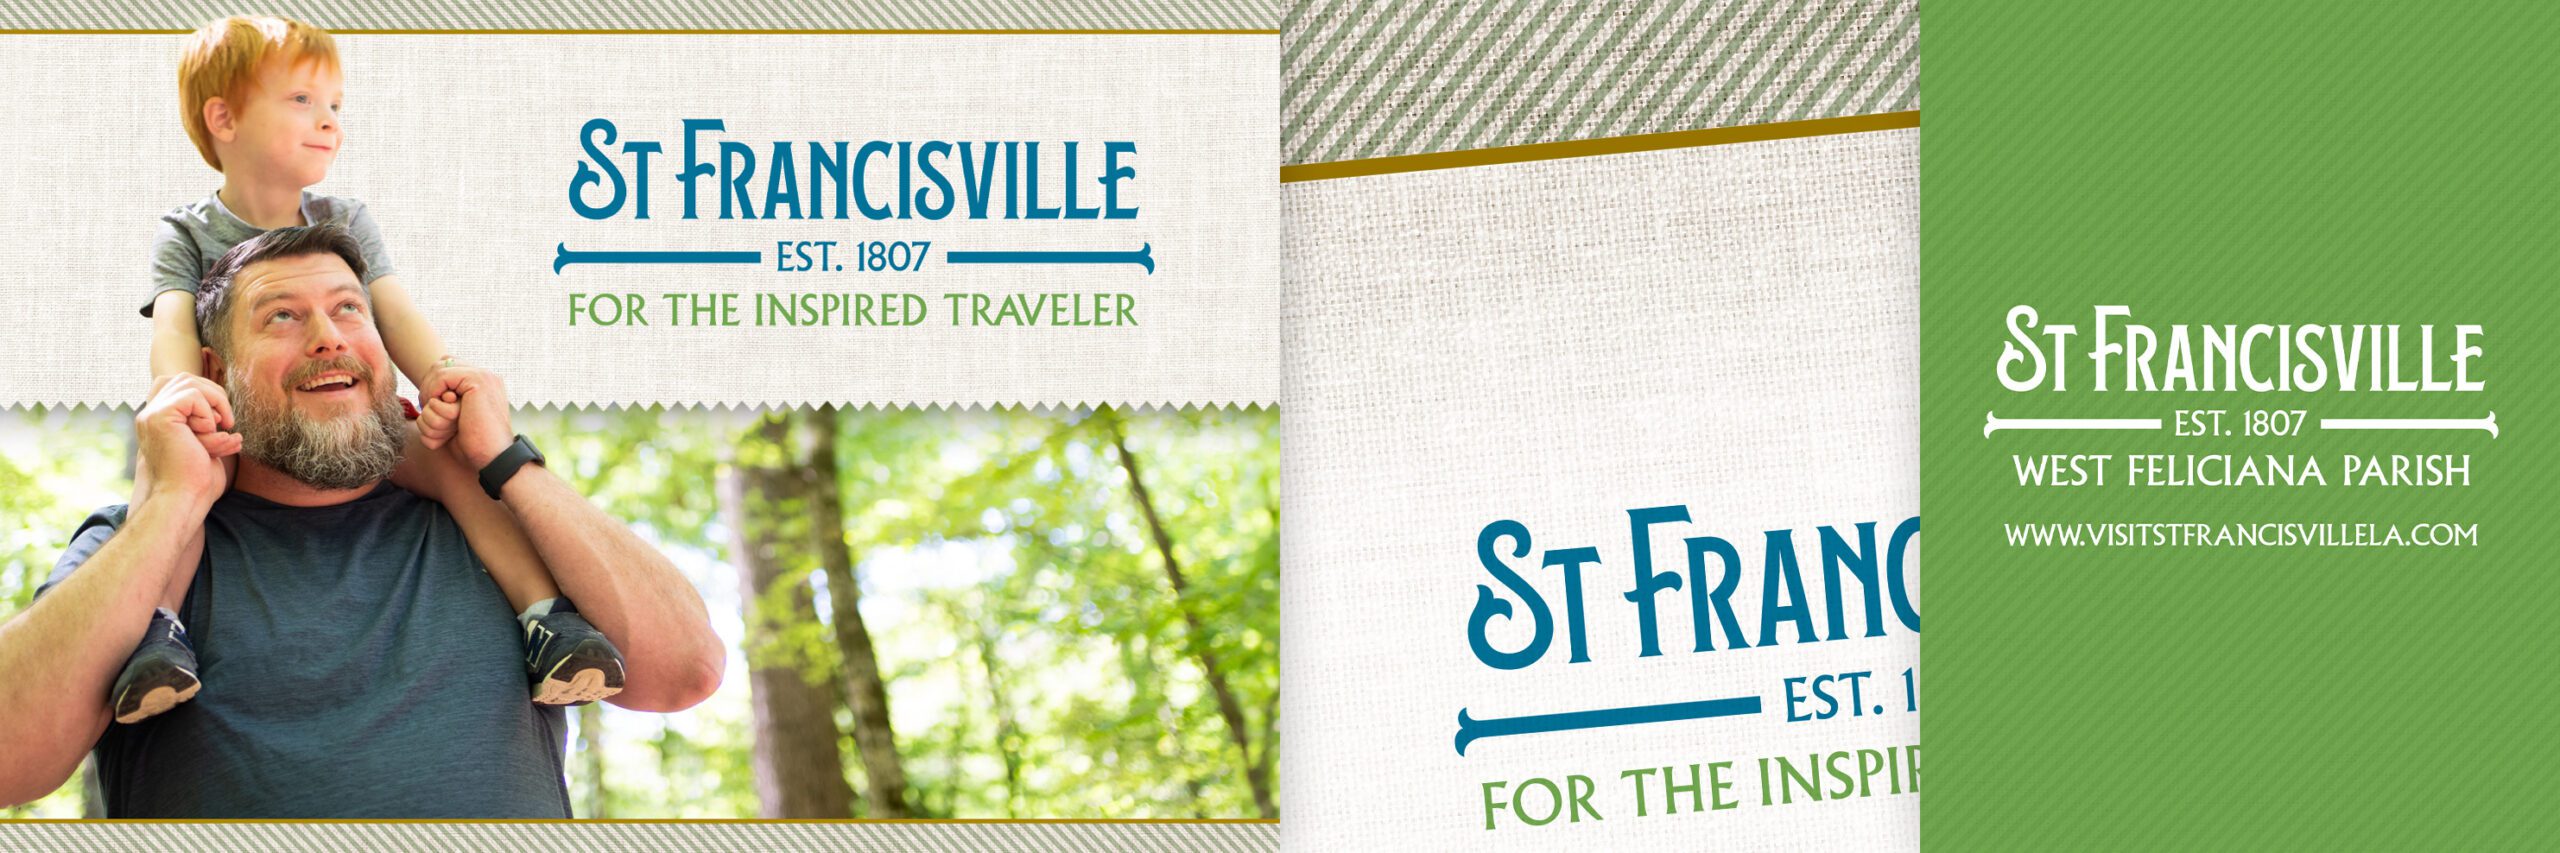 visit st. francisville new ad example